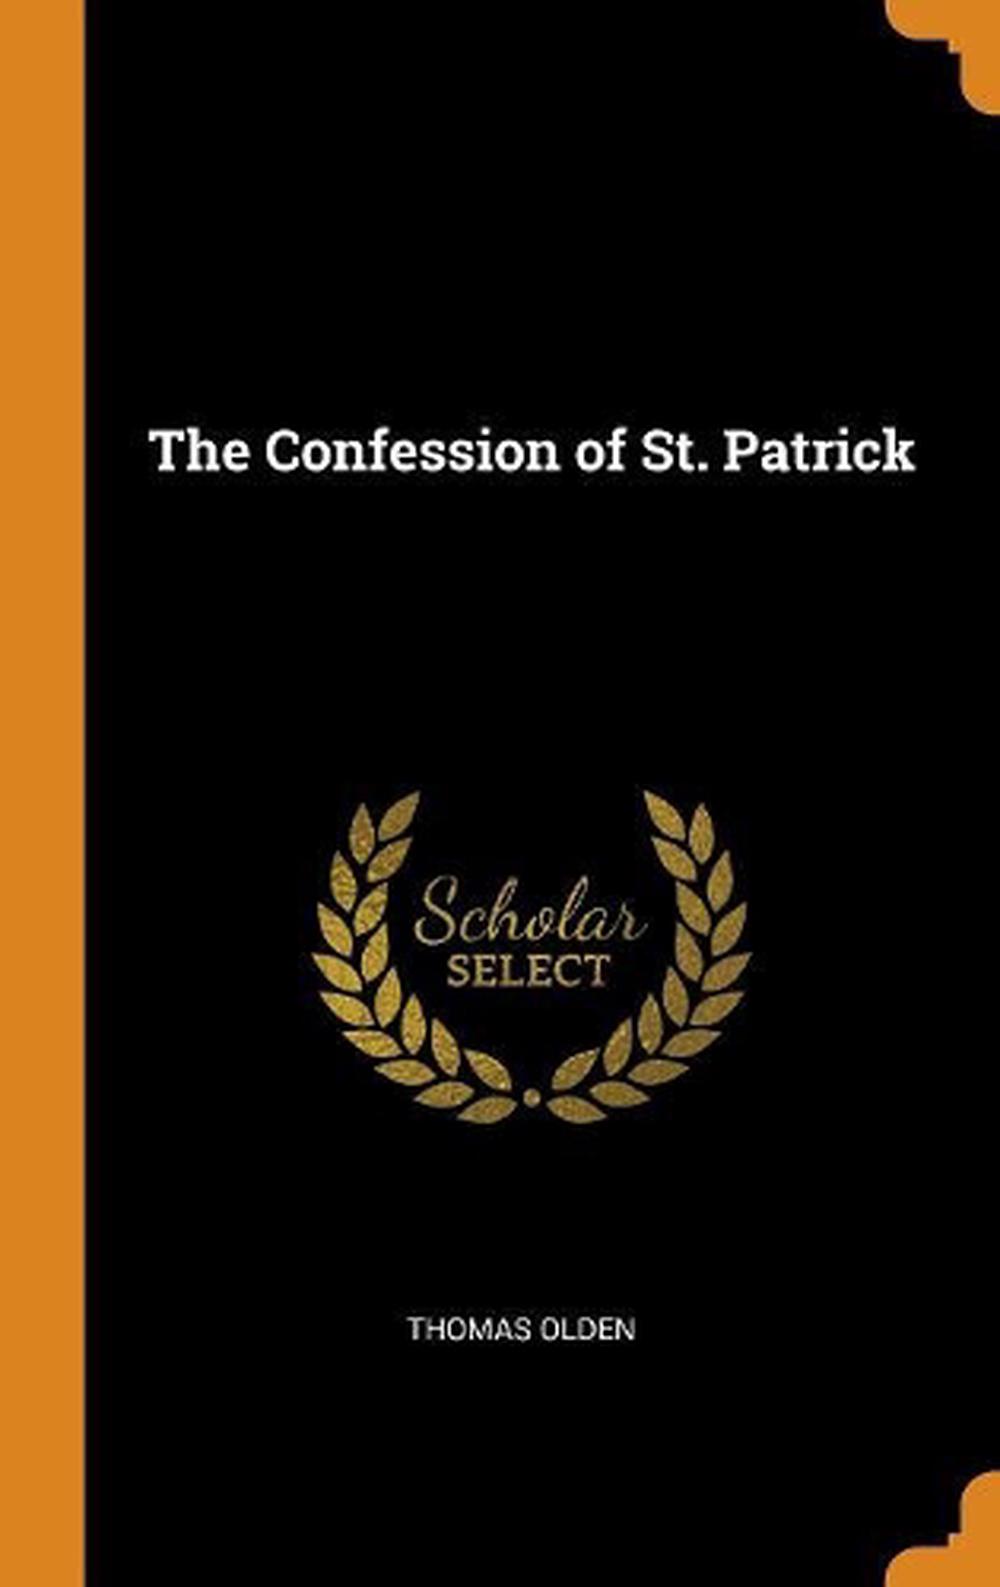 The Confession of Saint Patrick by Patrick of Ireland